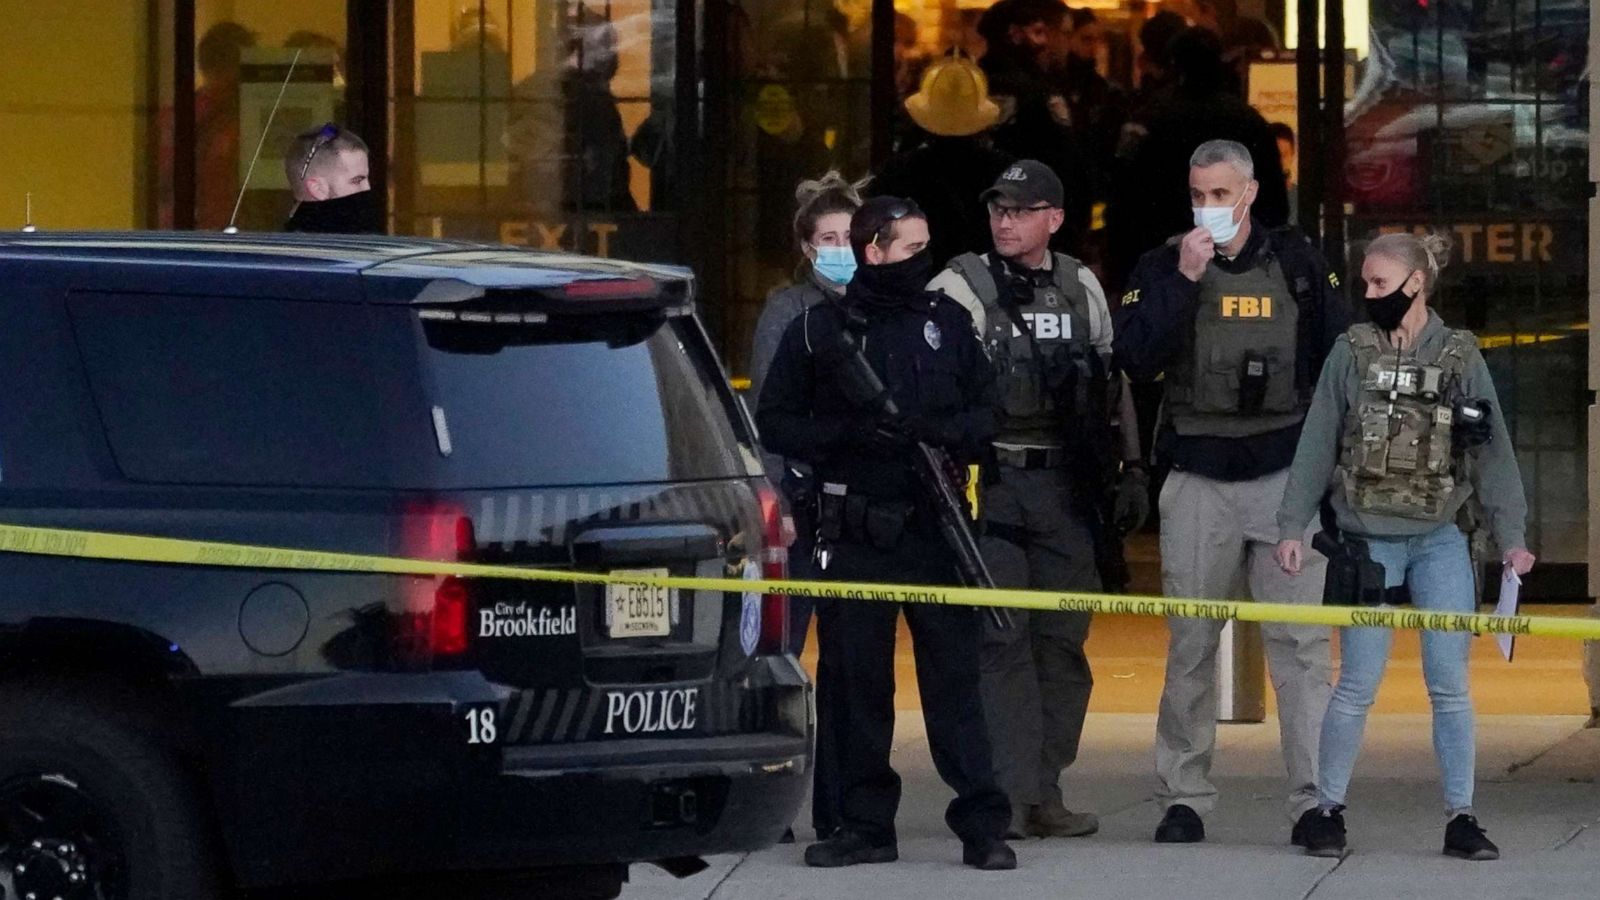 8 injured in active shooter incident at Wisconsin's Mayfair Mall - ABC News